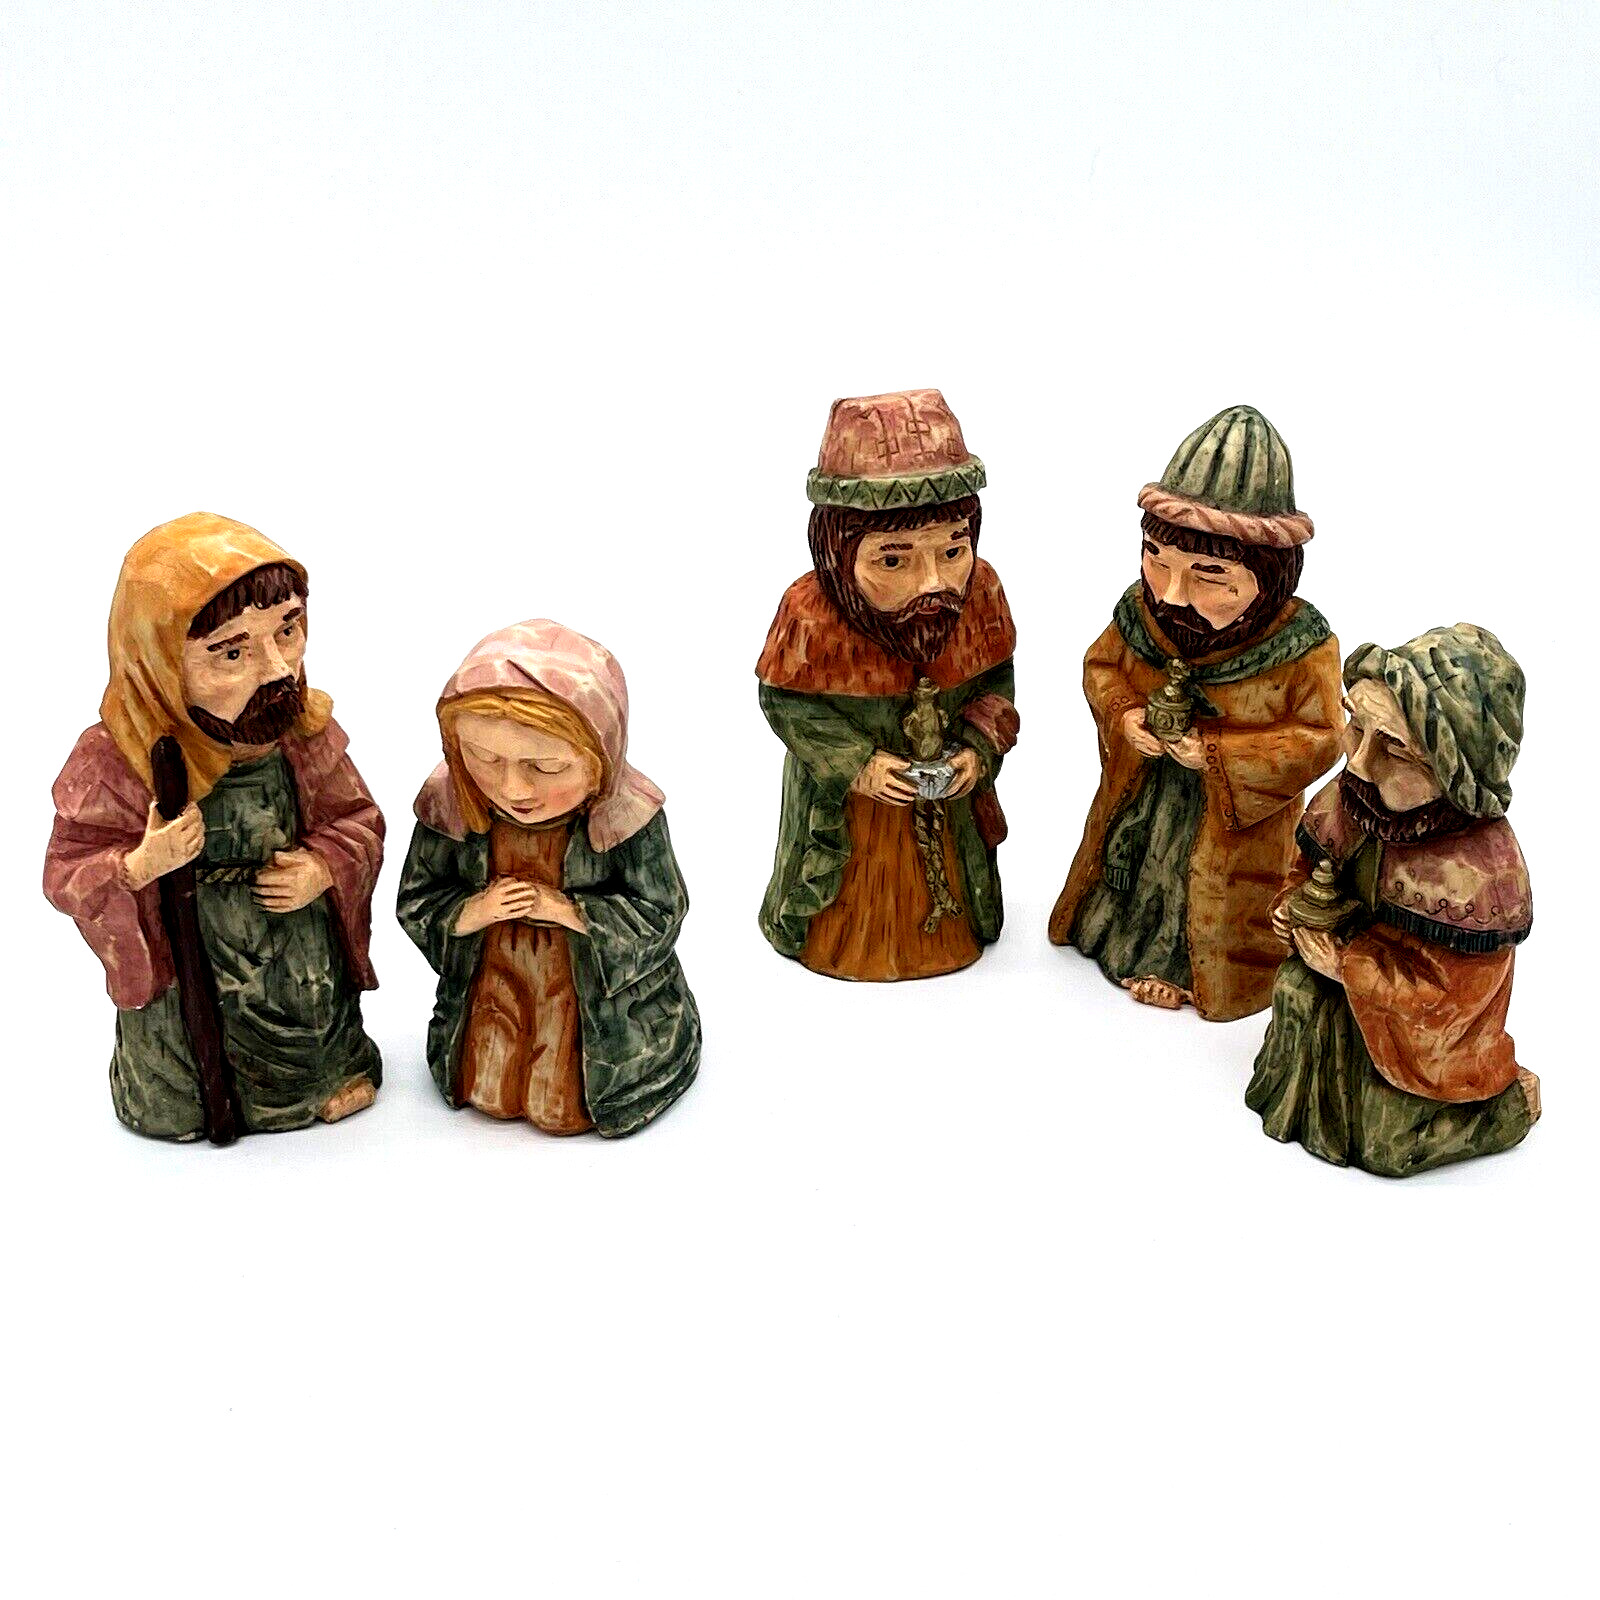 5 Creche Nativity Figures Mary Joseph Wise Men Wood Carving Look Resin 5\